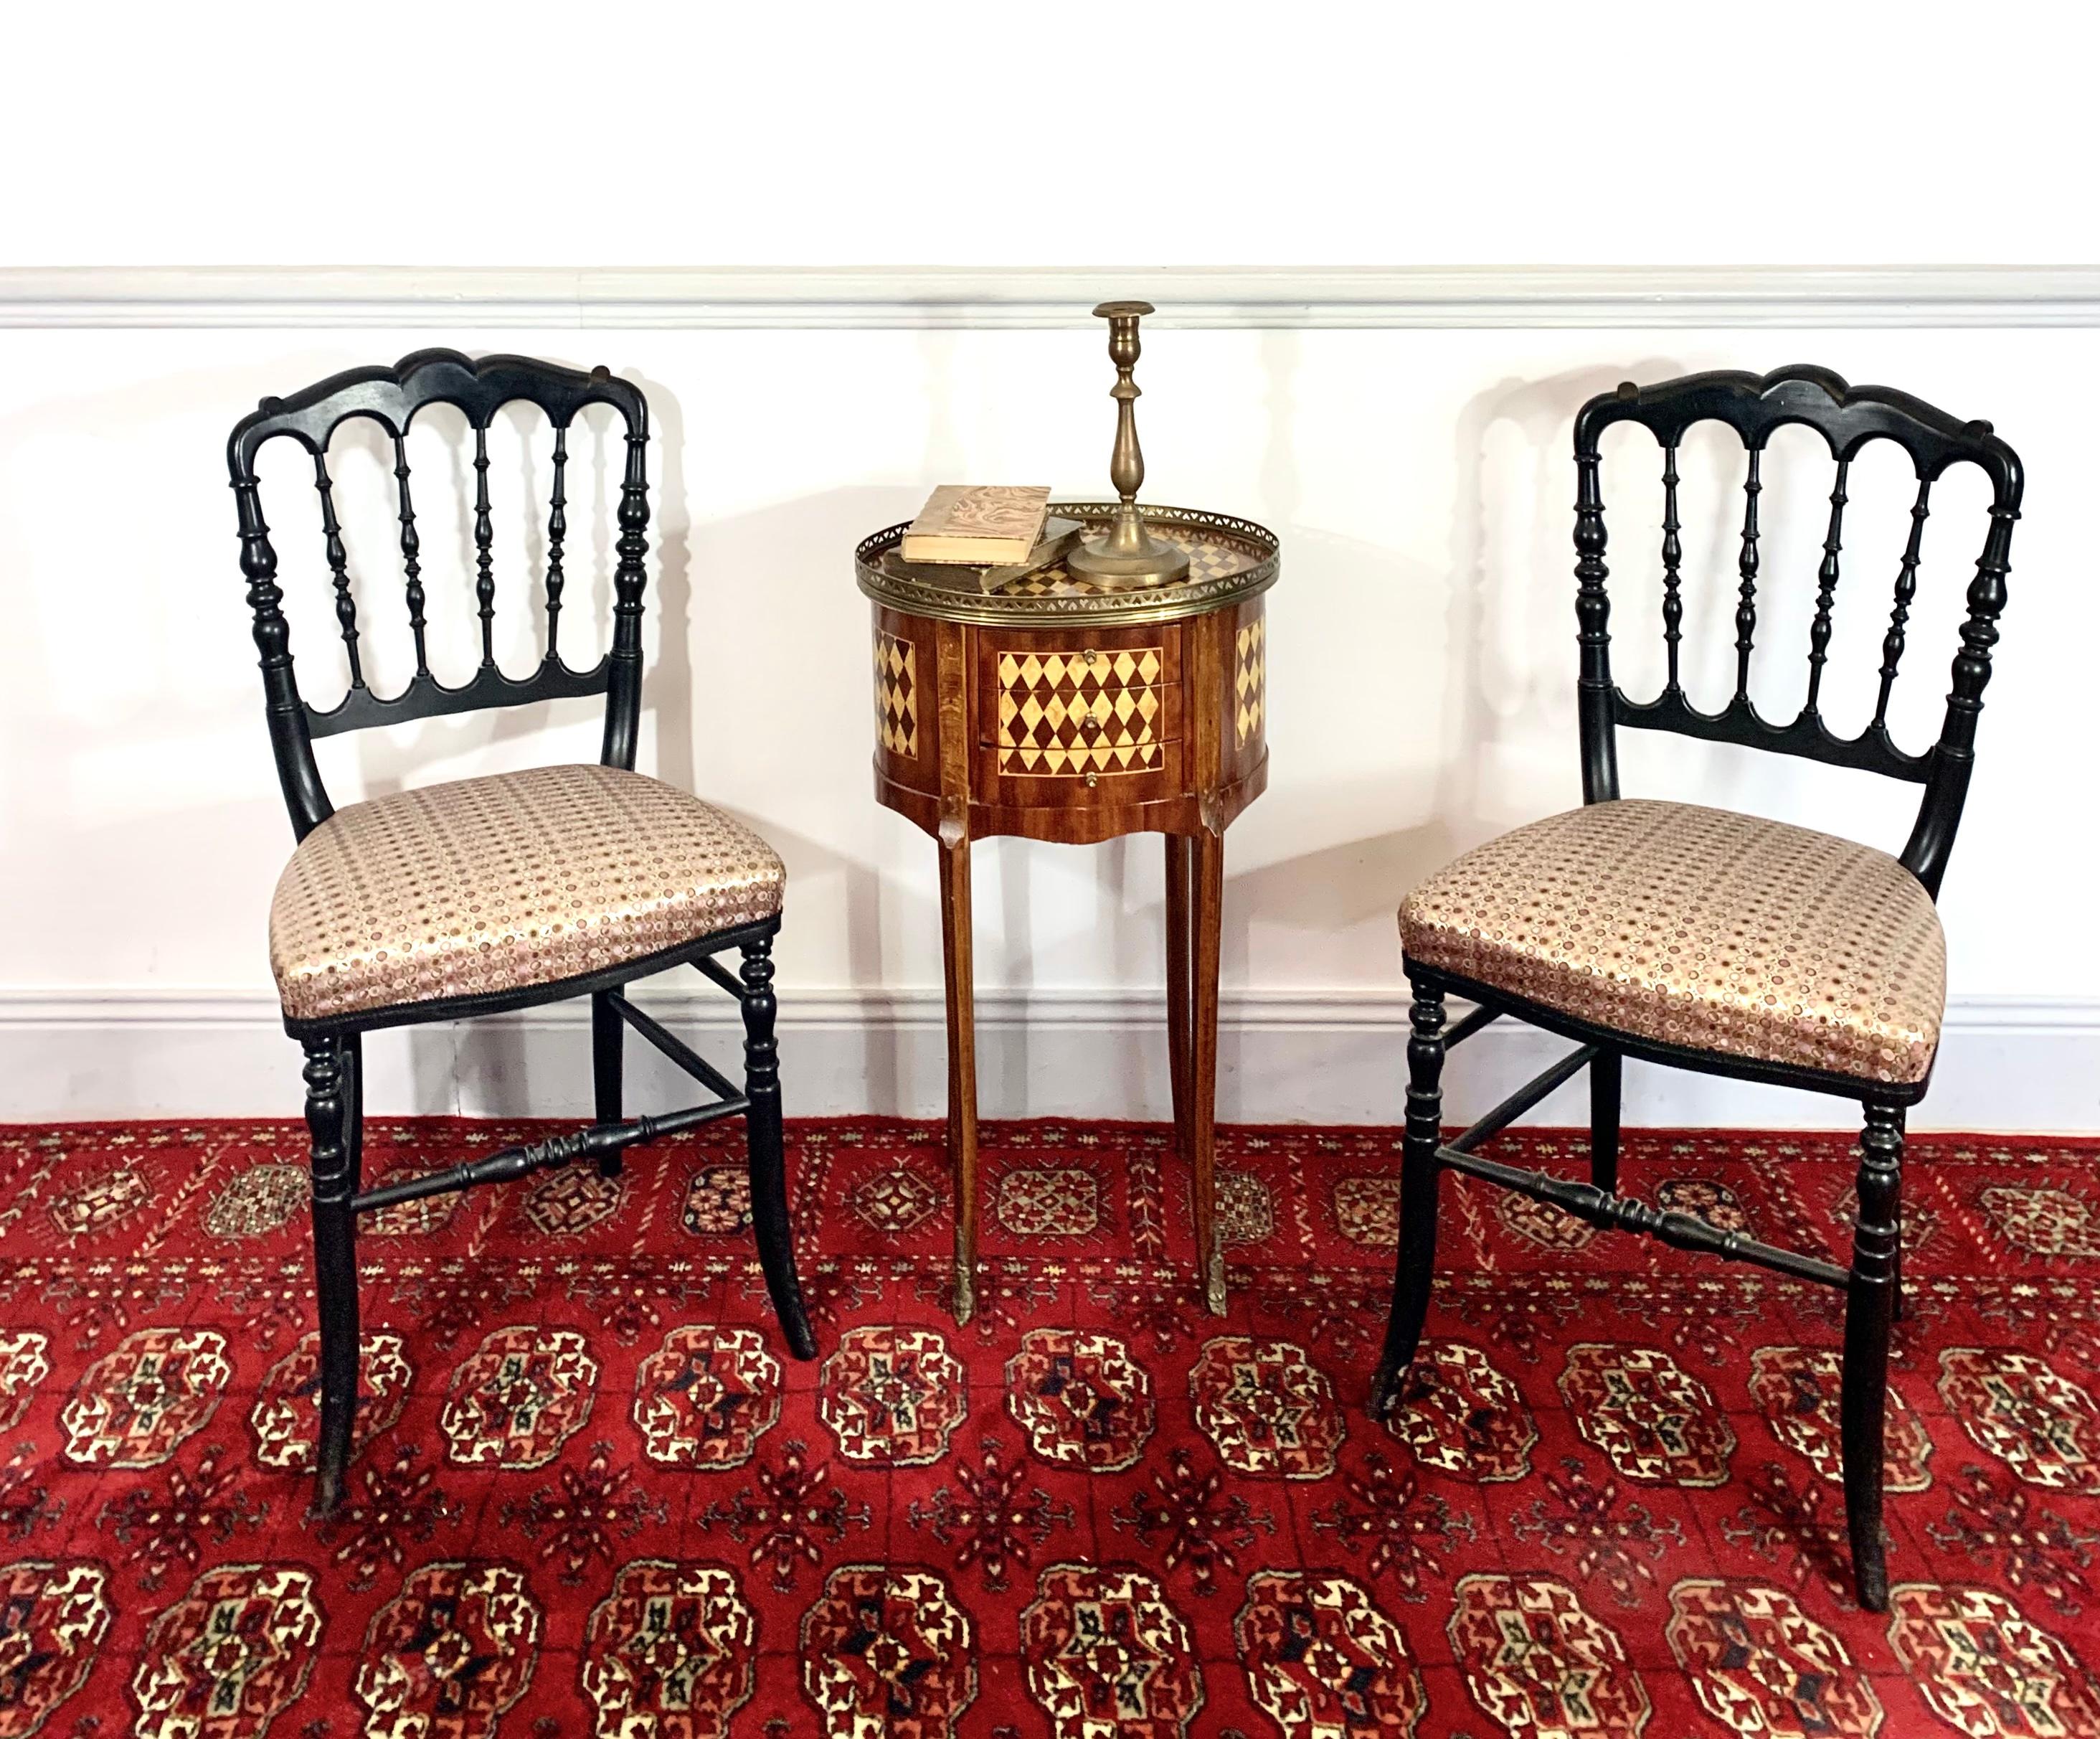 Nice pair of Napoleon III style chairs. The structure of this chair is made of blackened wood. The uprights are made of turned wood. The seat is covered with a jacquard fabric in violet colors.